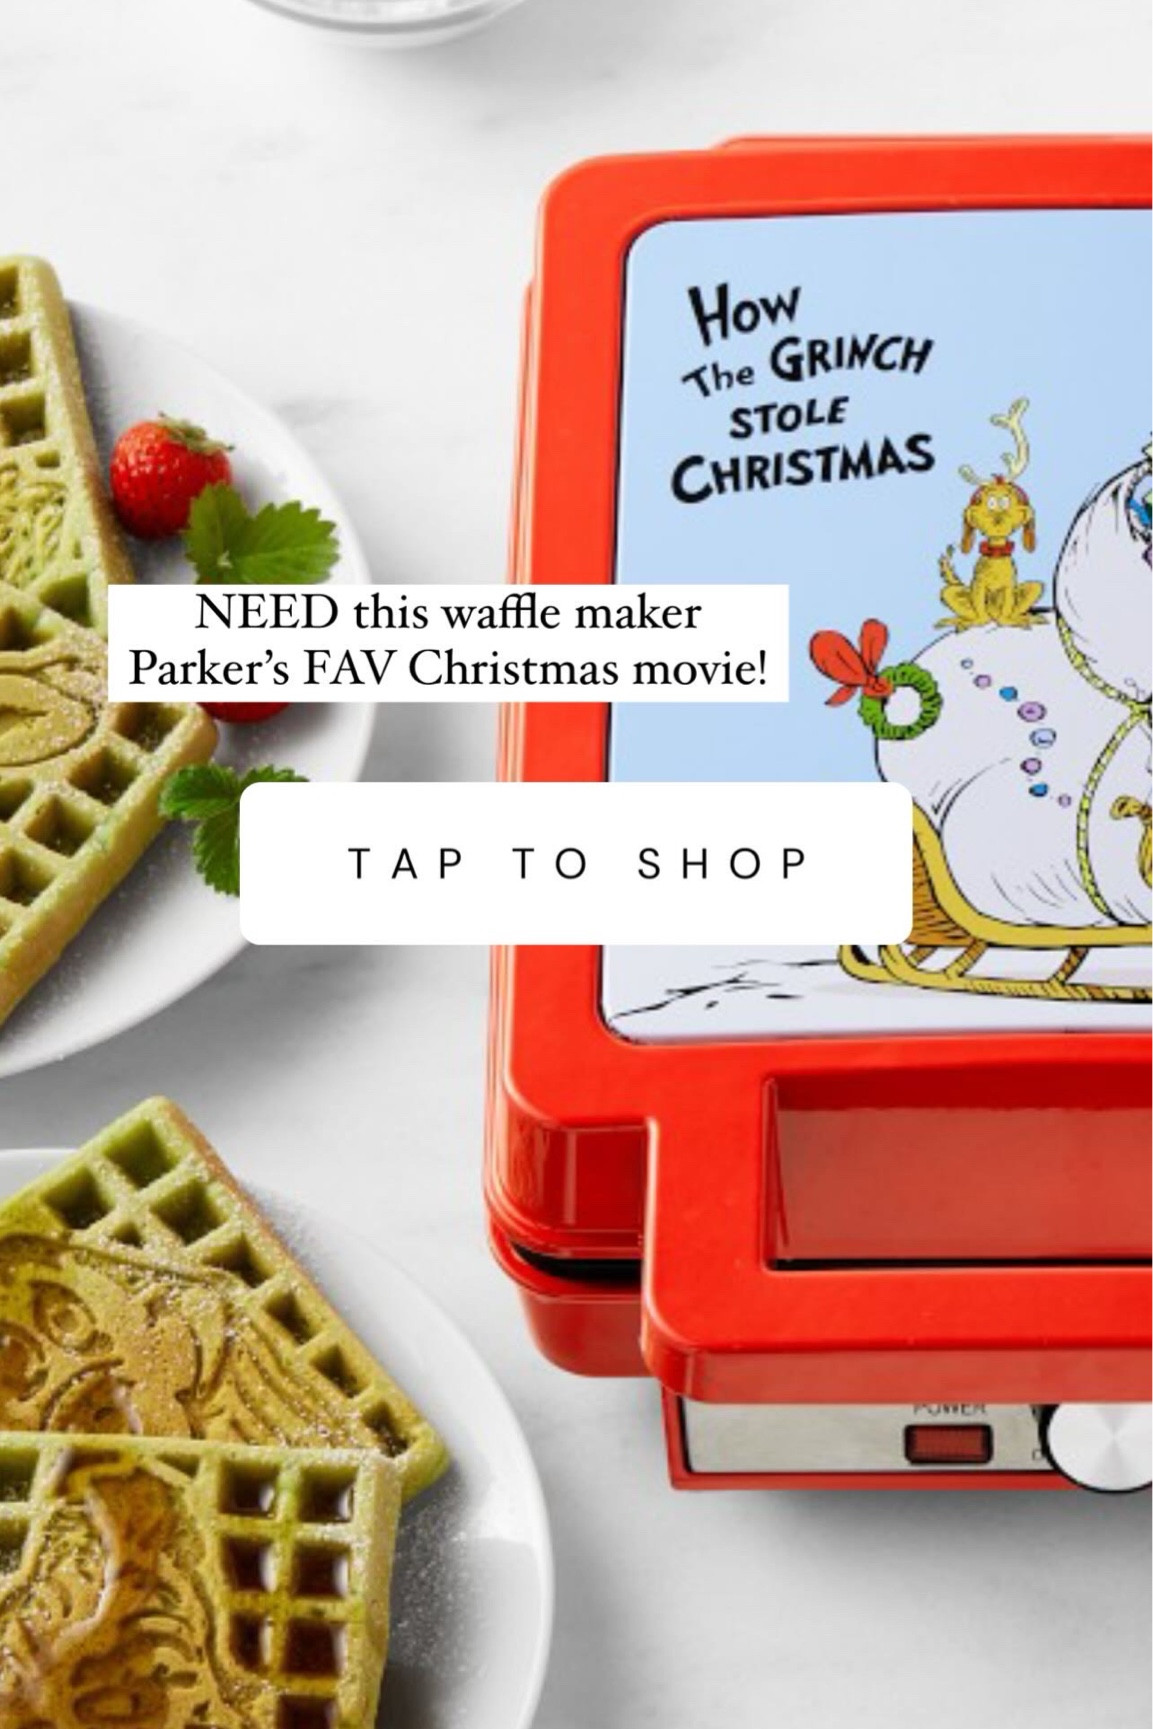 Grinch Waffle Maker. One of my favorite purchases ever.